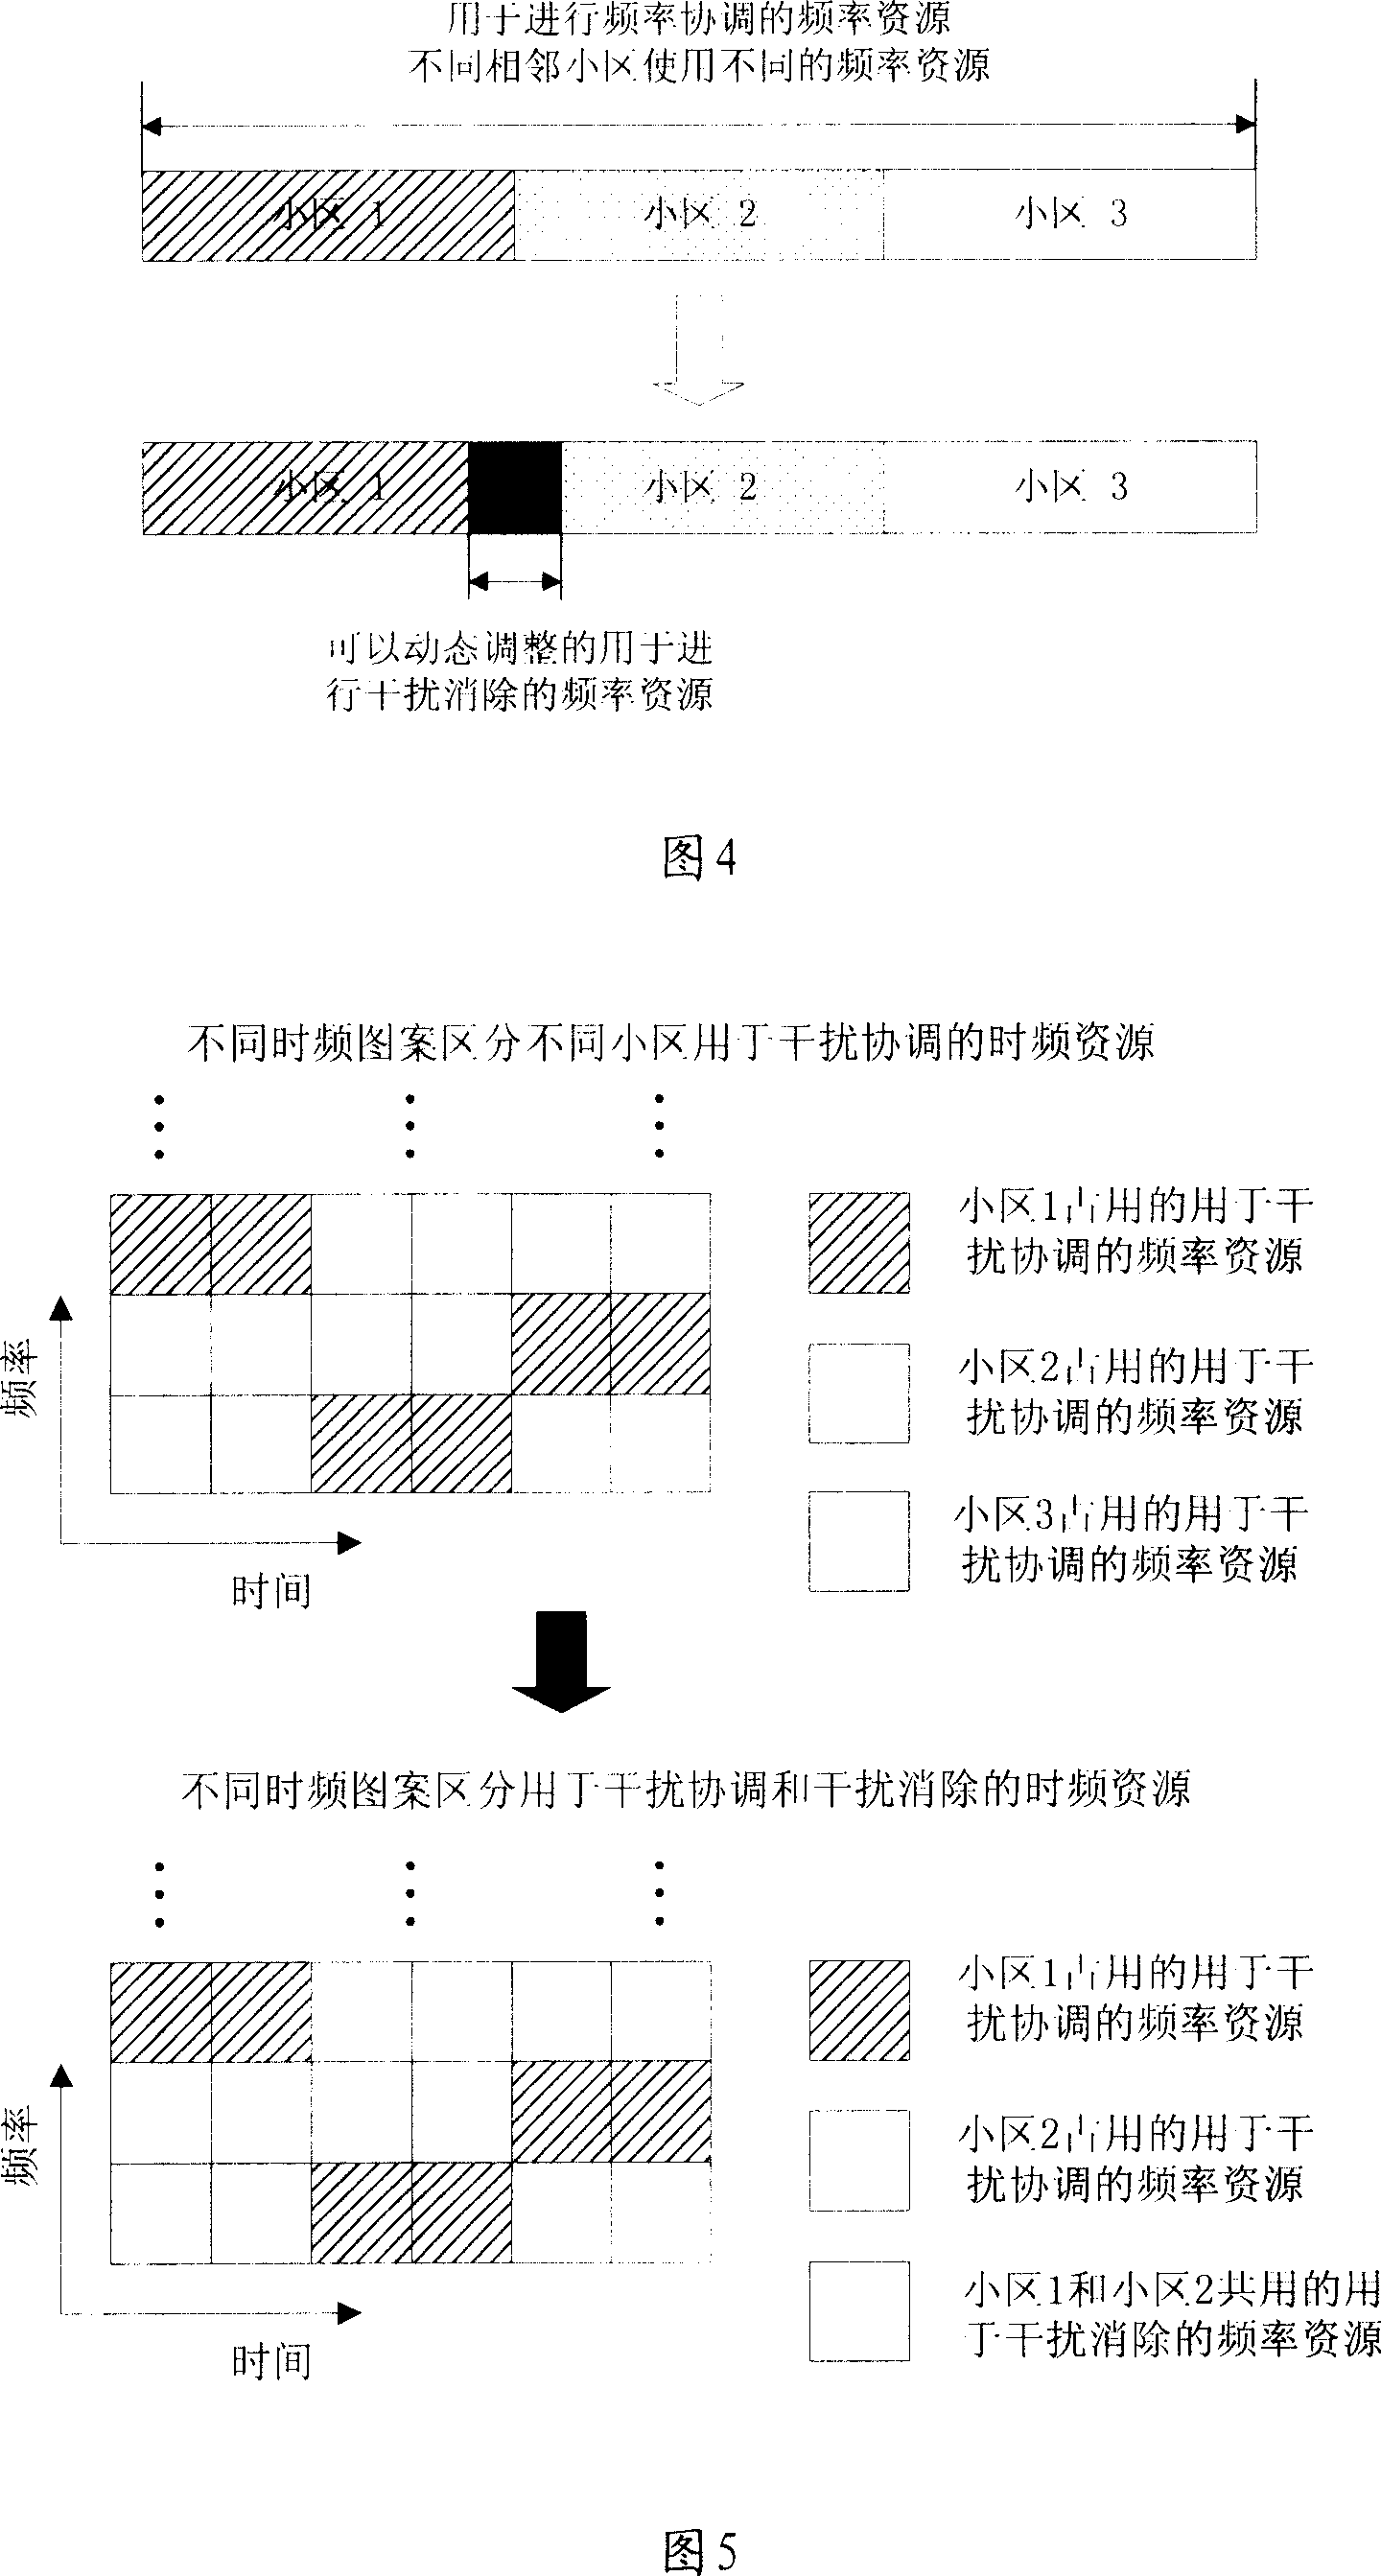 Implementation method and device for avoiding the interference between the cells